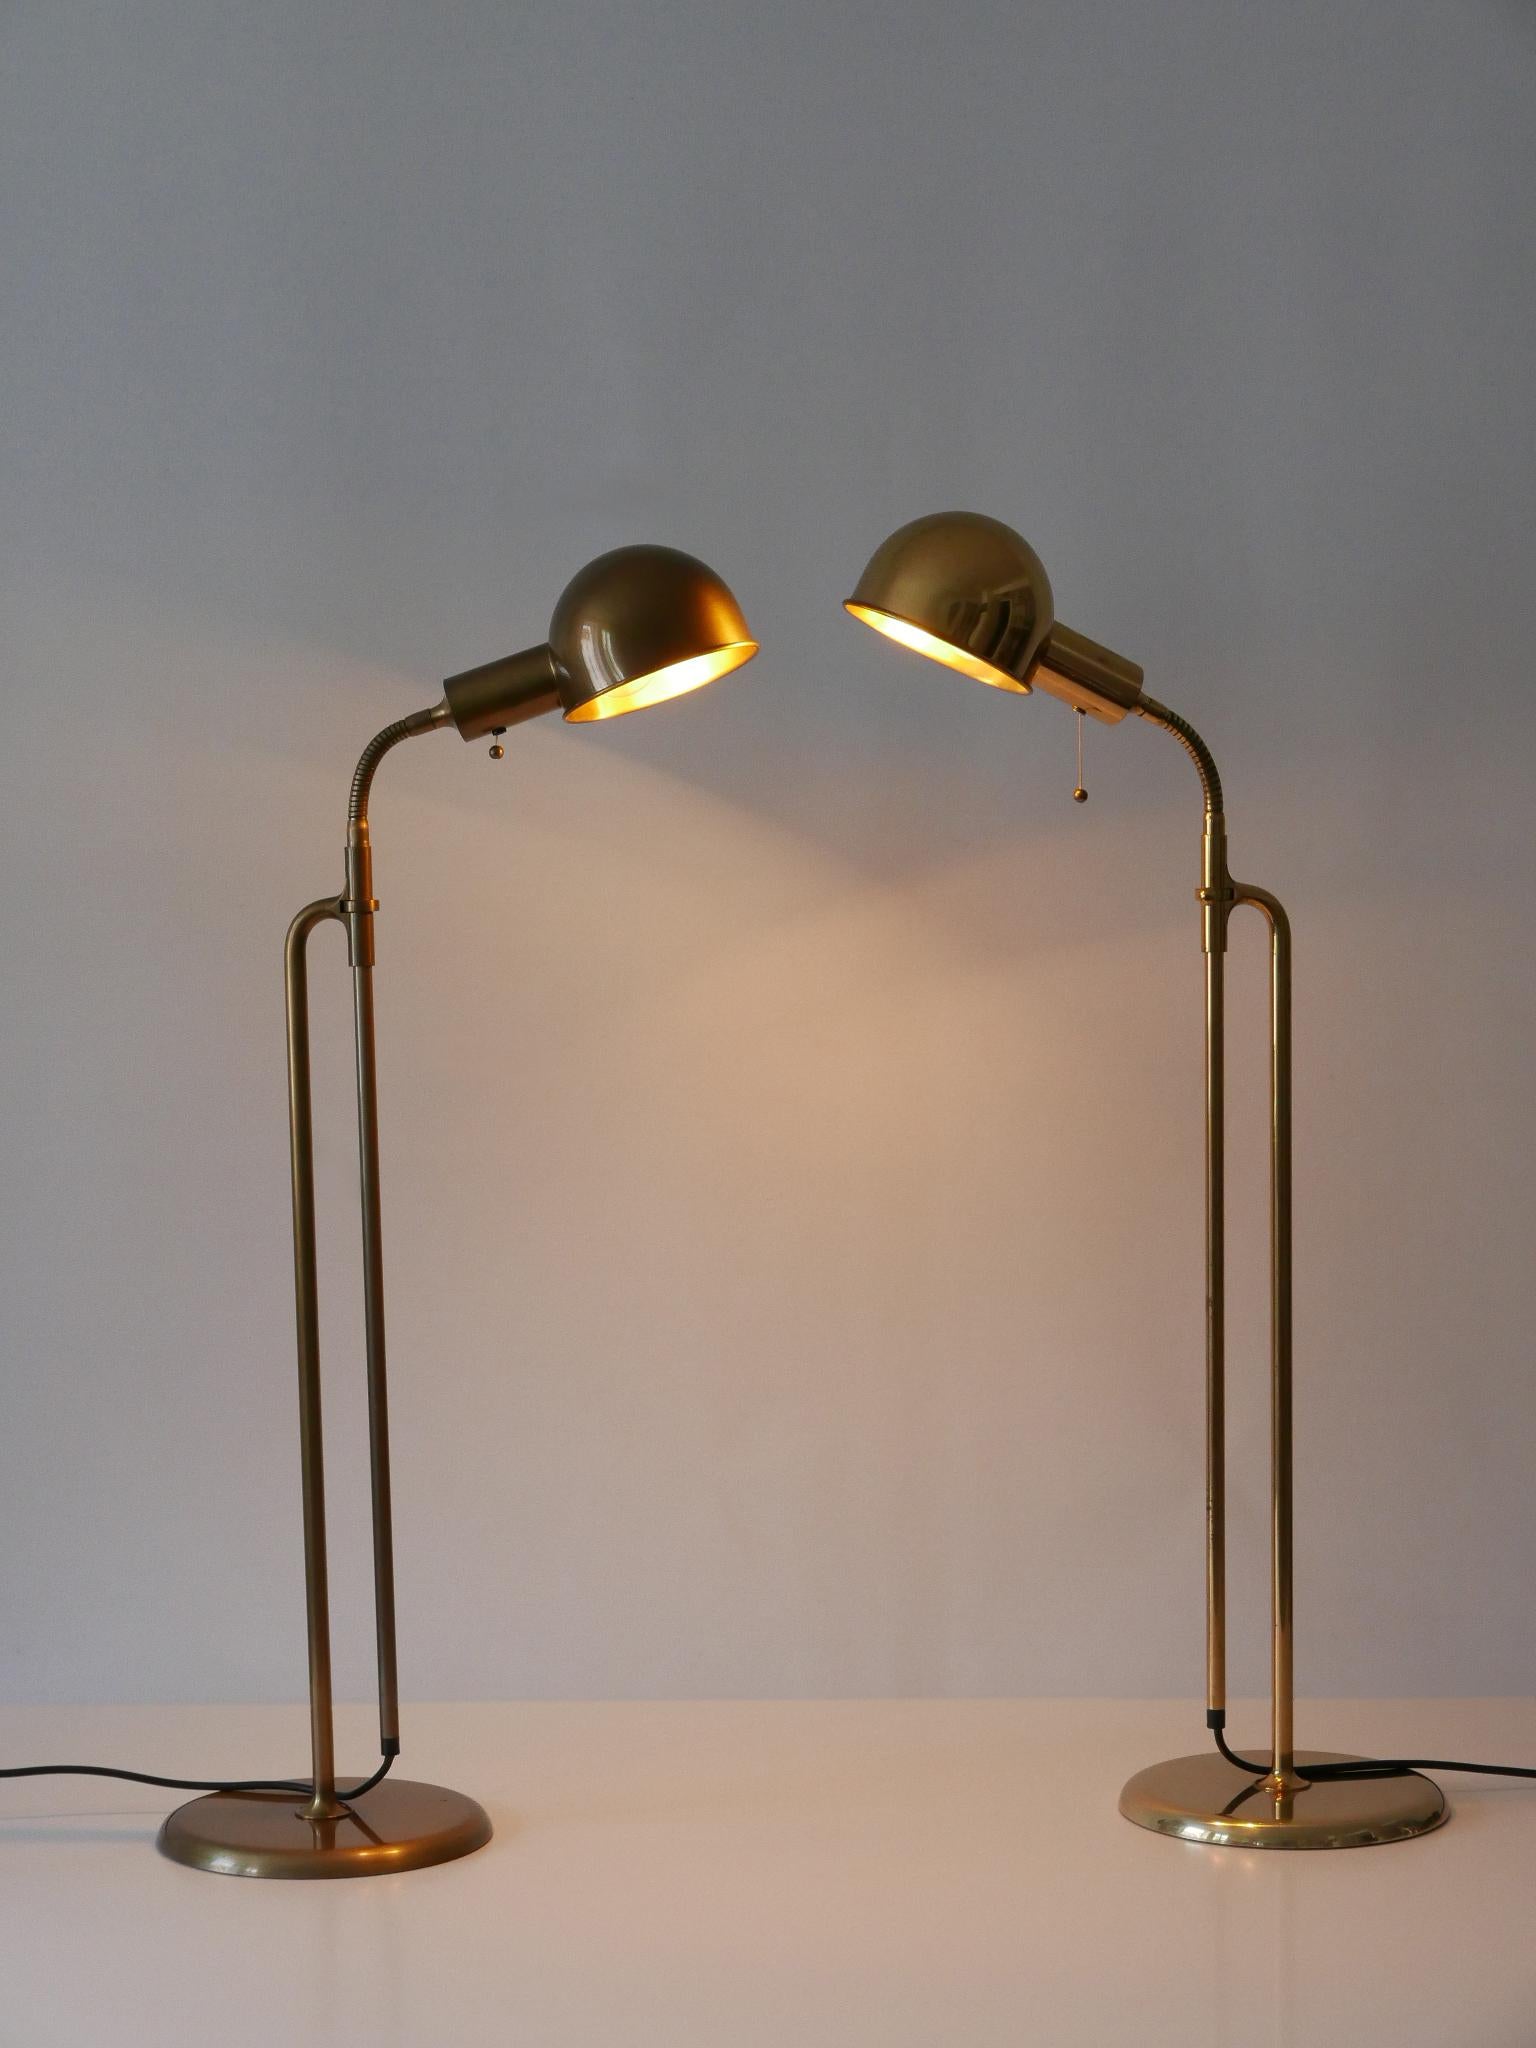 Set of two elegant and articulated floor lamps or reading lights. Model Bola. Designed and manufactured by Florian Schulz, Germany, 1970s.

The lamps are in different finishing. One is executed in polished brass, the other in bronze colored